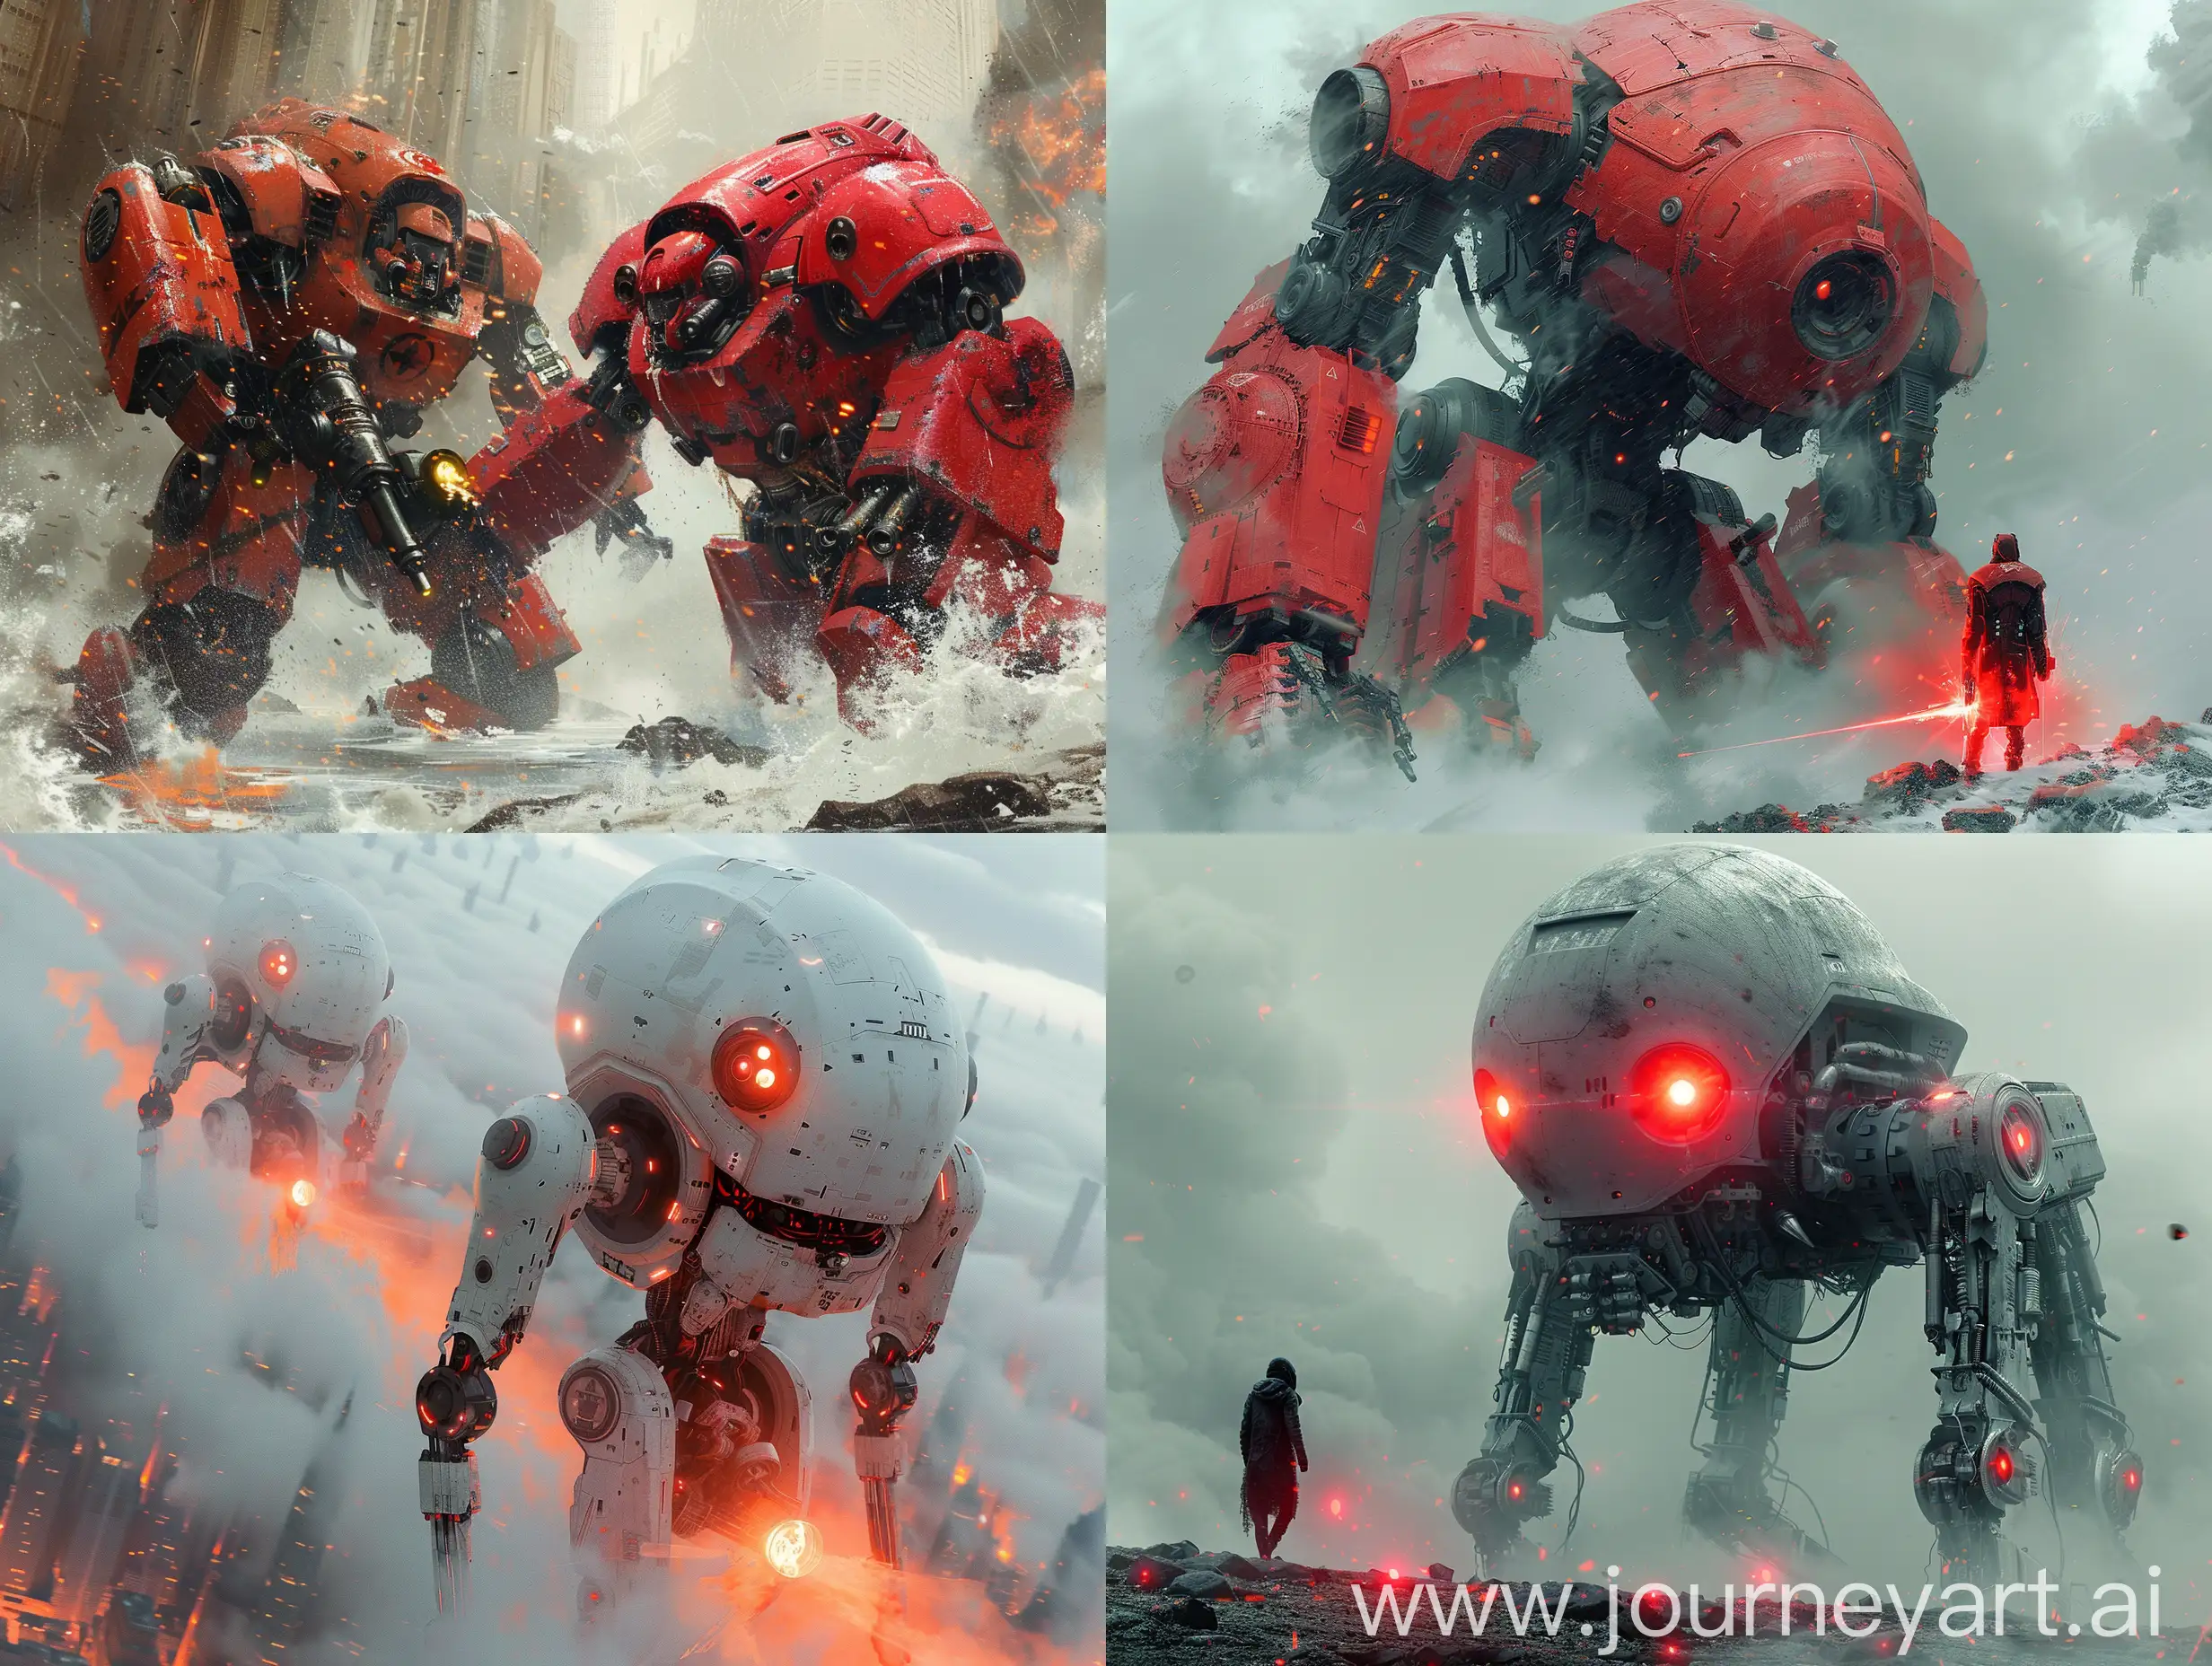 Epic-SciFi-Battle-of-Two-Robots-with-High-Contrast-Chaos